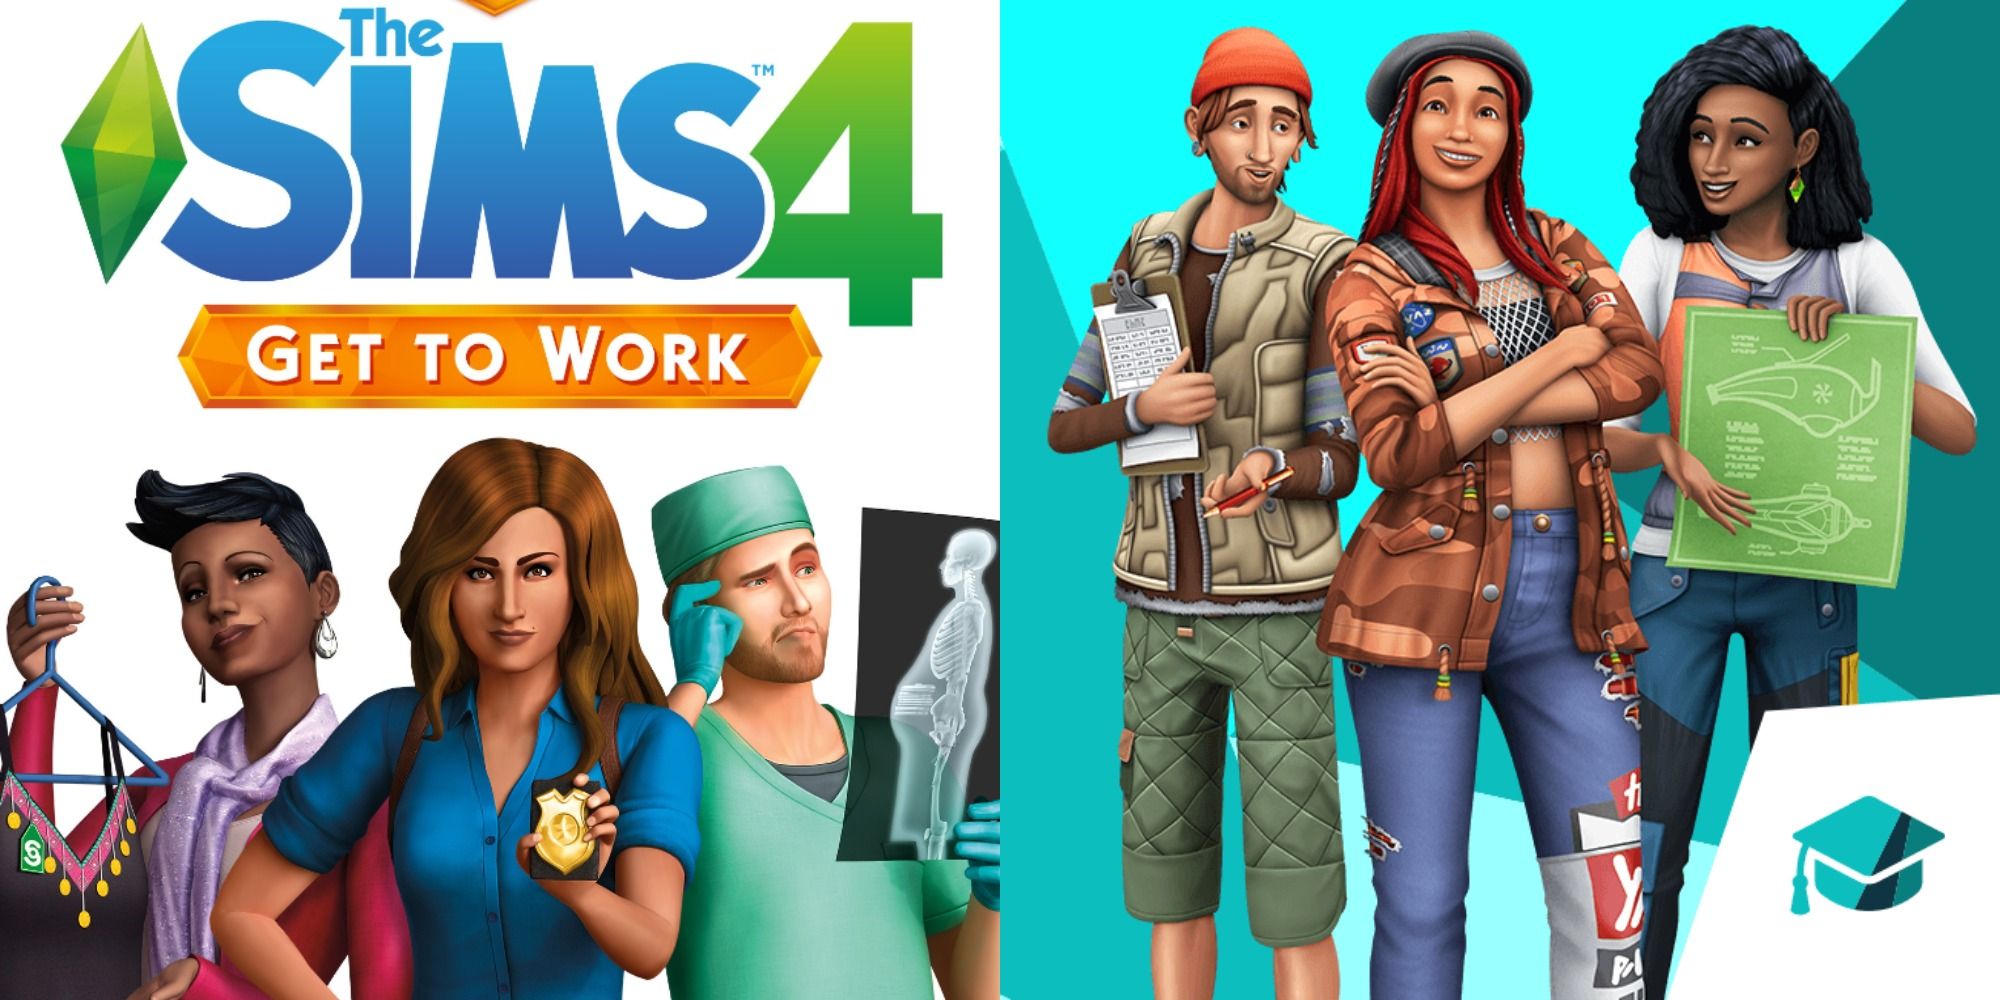 the sims 4 get to work expansion pack features